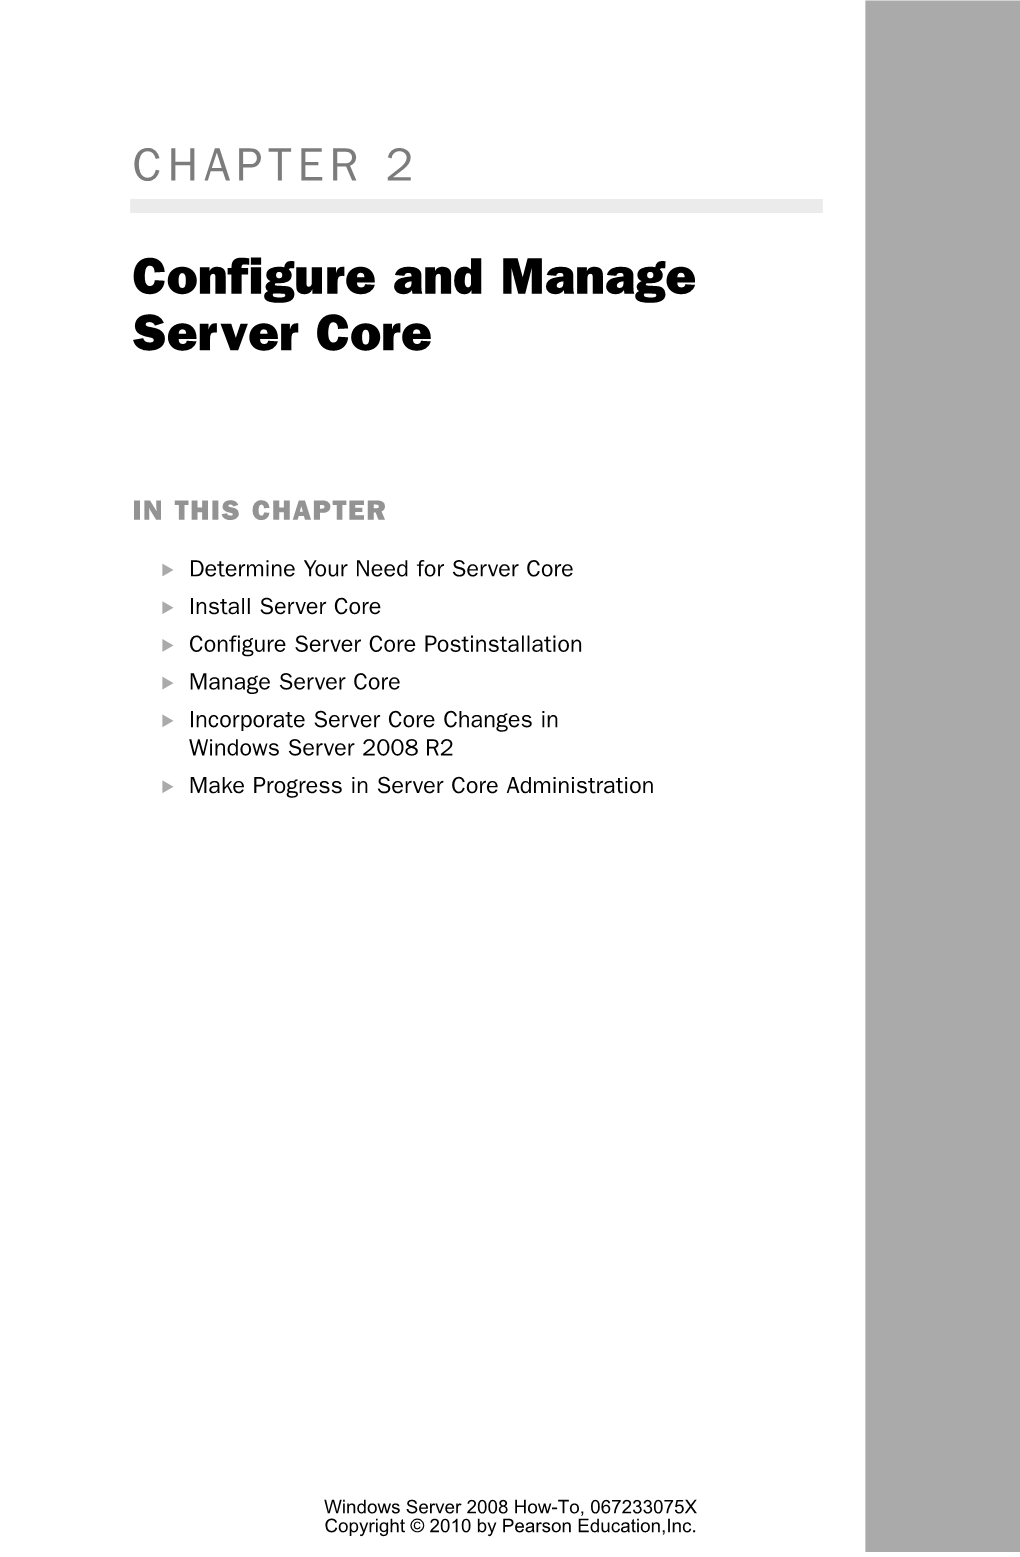 Configure and Manage Server Core